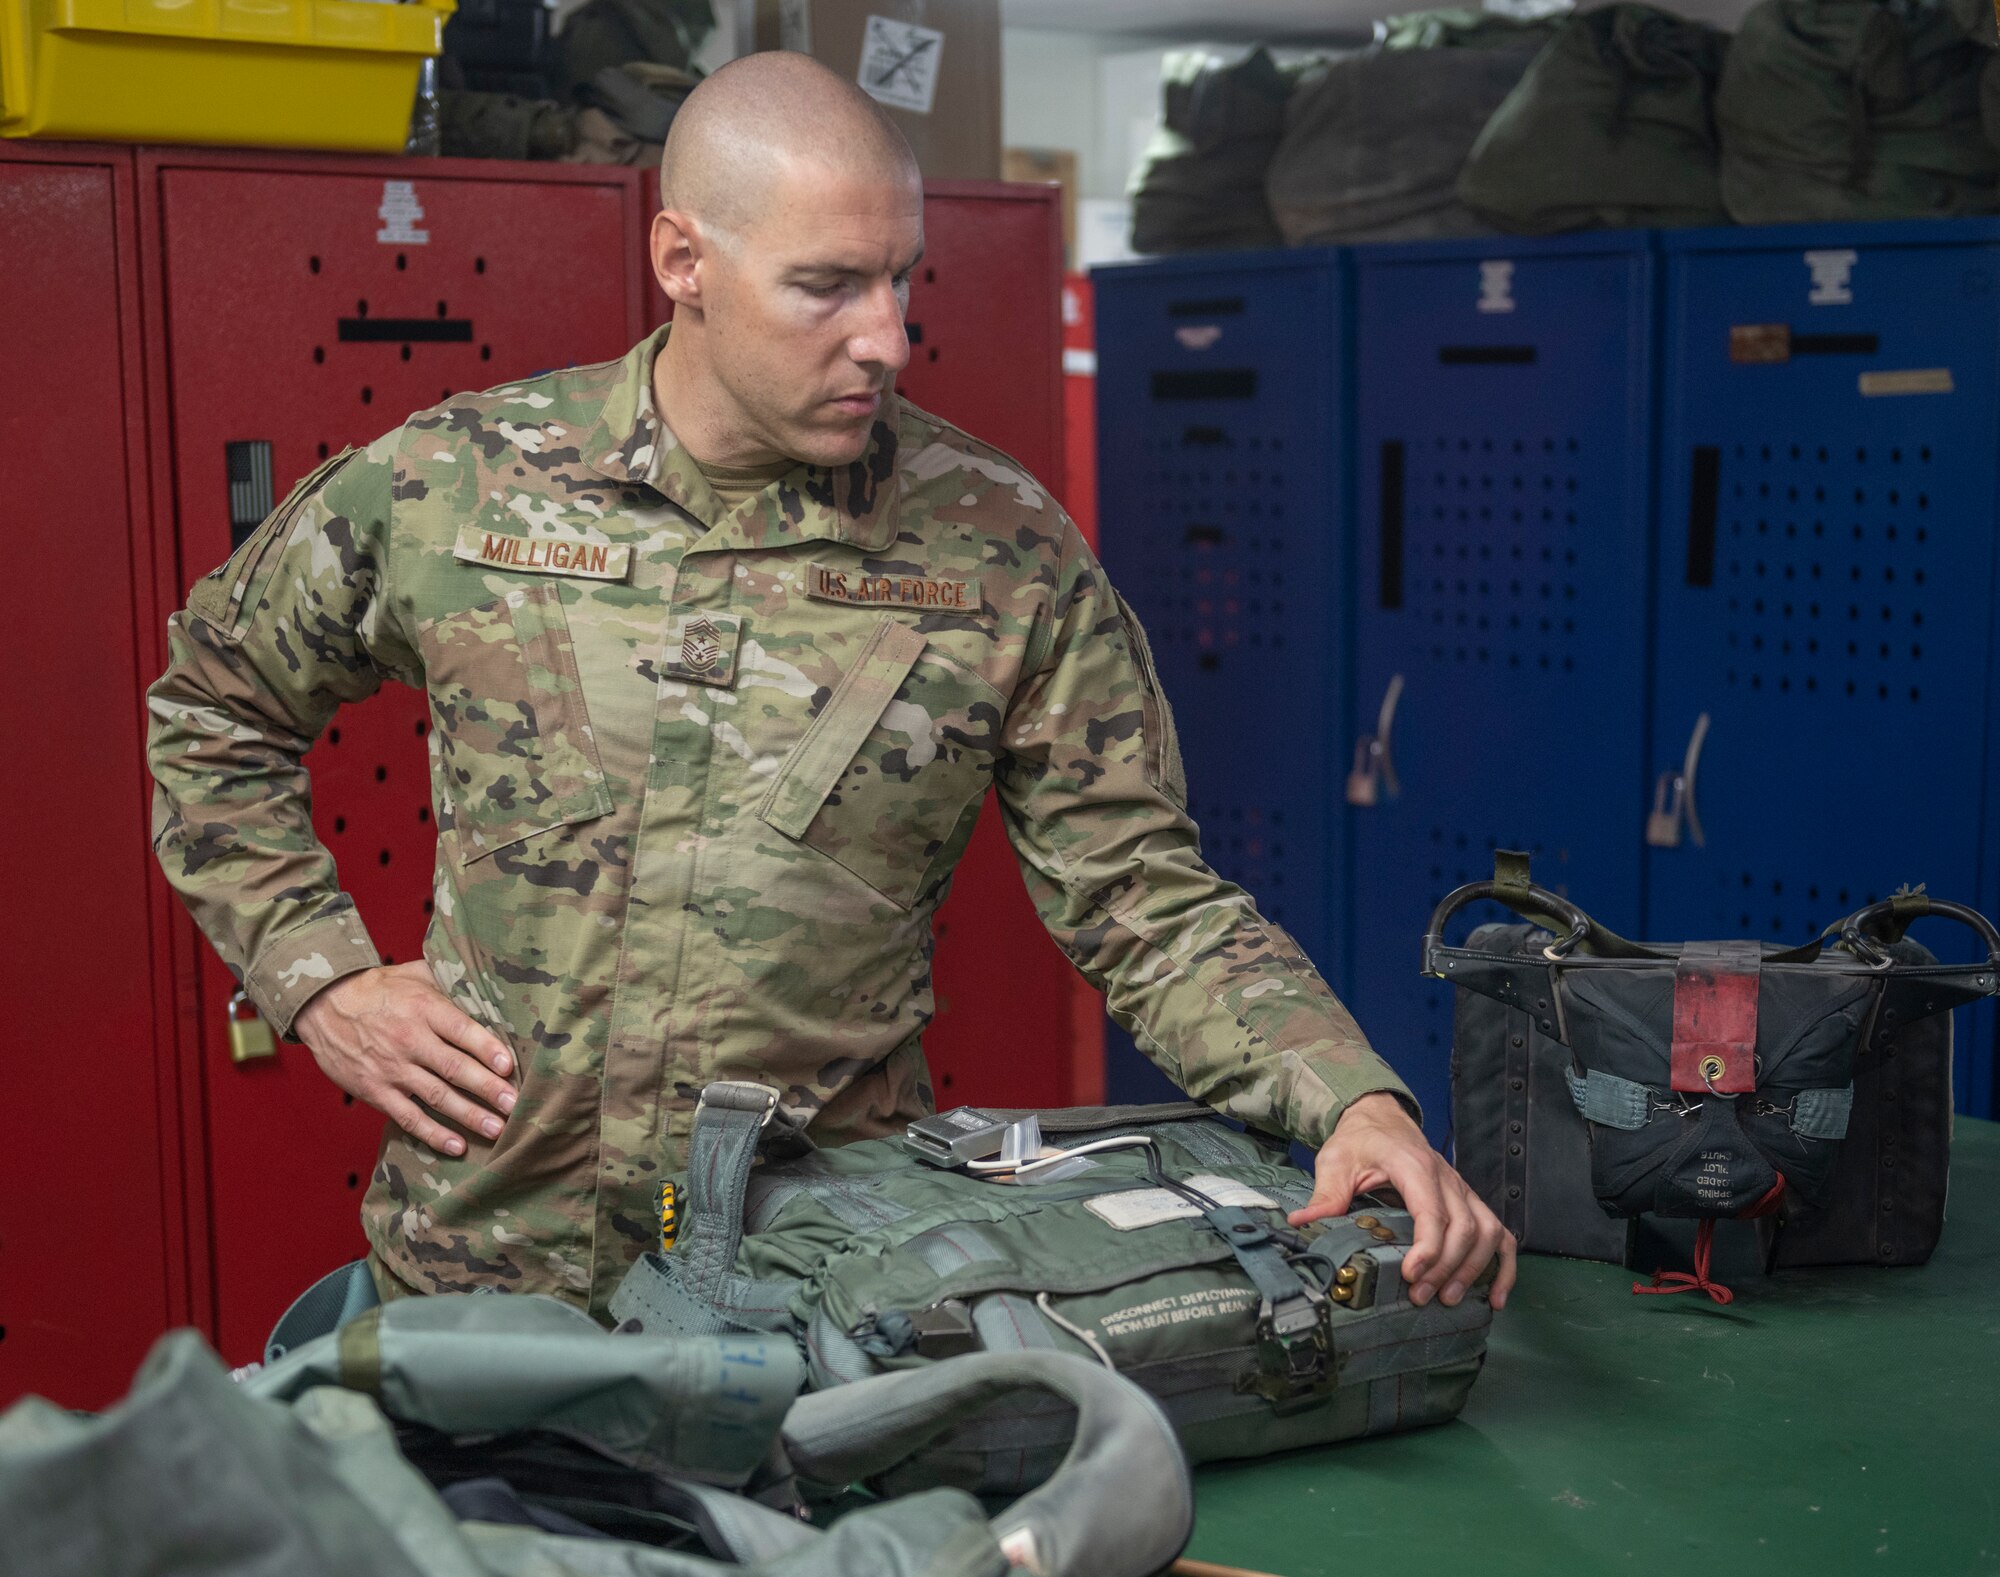 U.S. Air Force Chief Master Sgt. Sean Milligan, 332nd Air Expeditionary Wing command chief, inspects an Advanced Concept Ejection Seat II Survival Kit Sept. 4, 2021, at an undisclosed location somewhere in Southwest Asia. Aircrew flight equipment technicians ensure pilots are equipped with the specific gear needed to perform their missions. (U.S. Air Force photo by Senior Airman Cameron Otte)